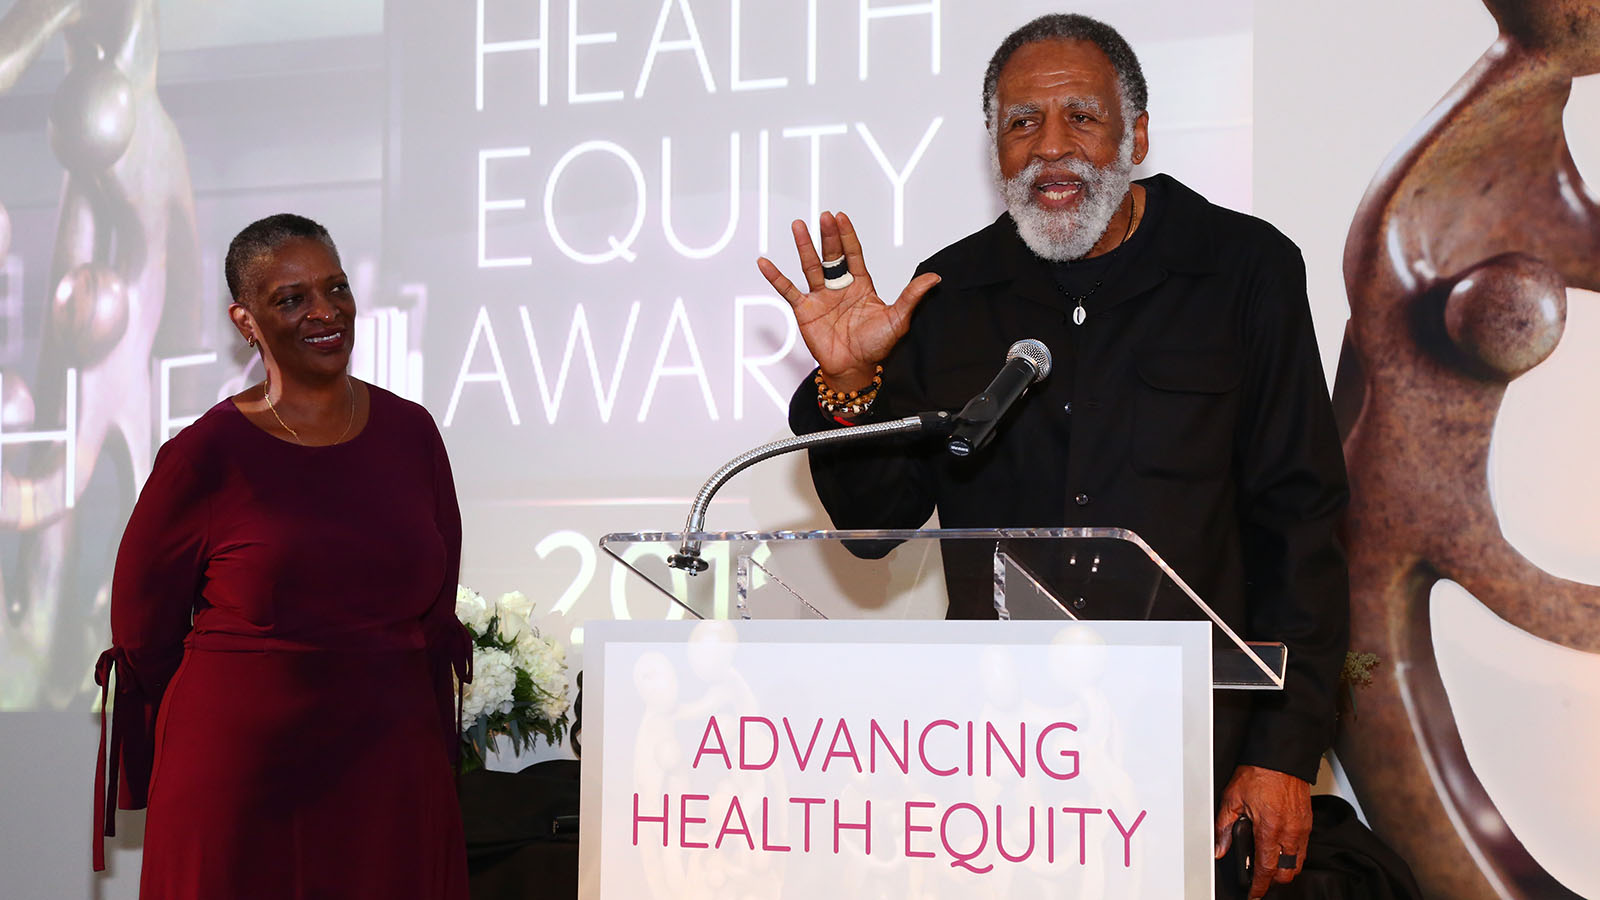 Arnold X. Perkins Award for Outstanding Health Equity Practice - 2019